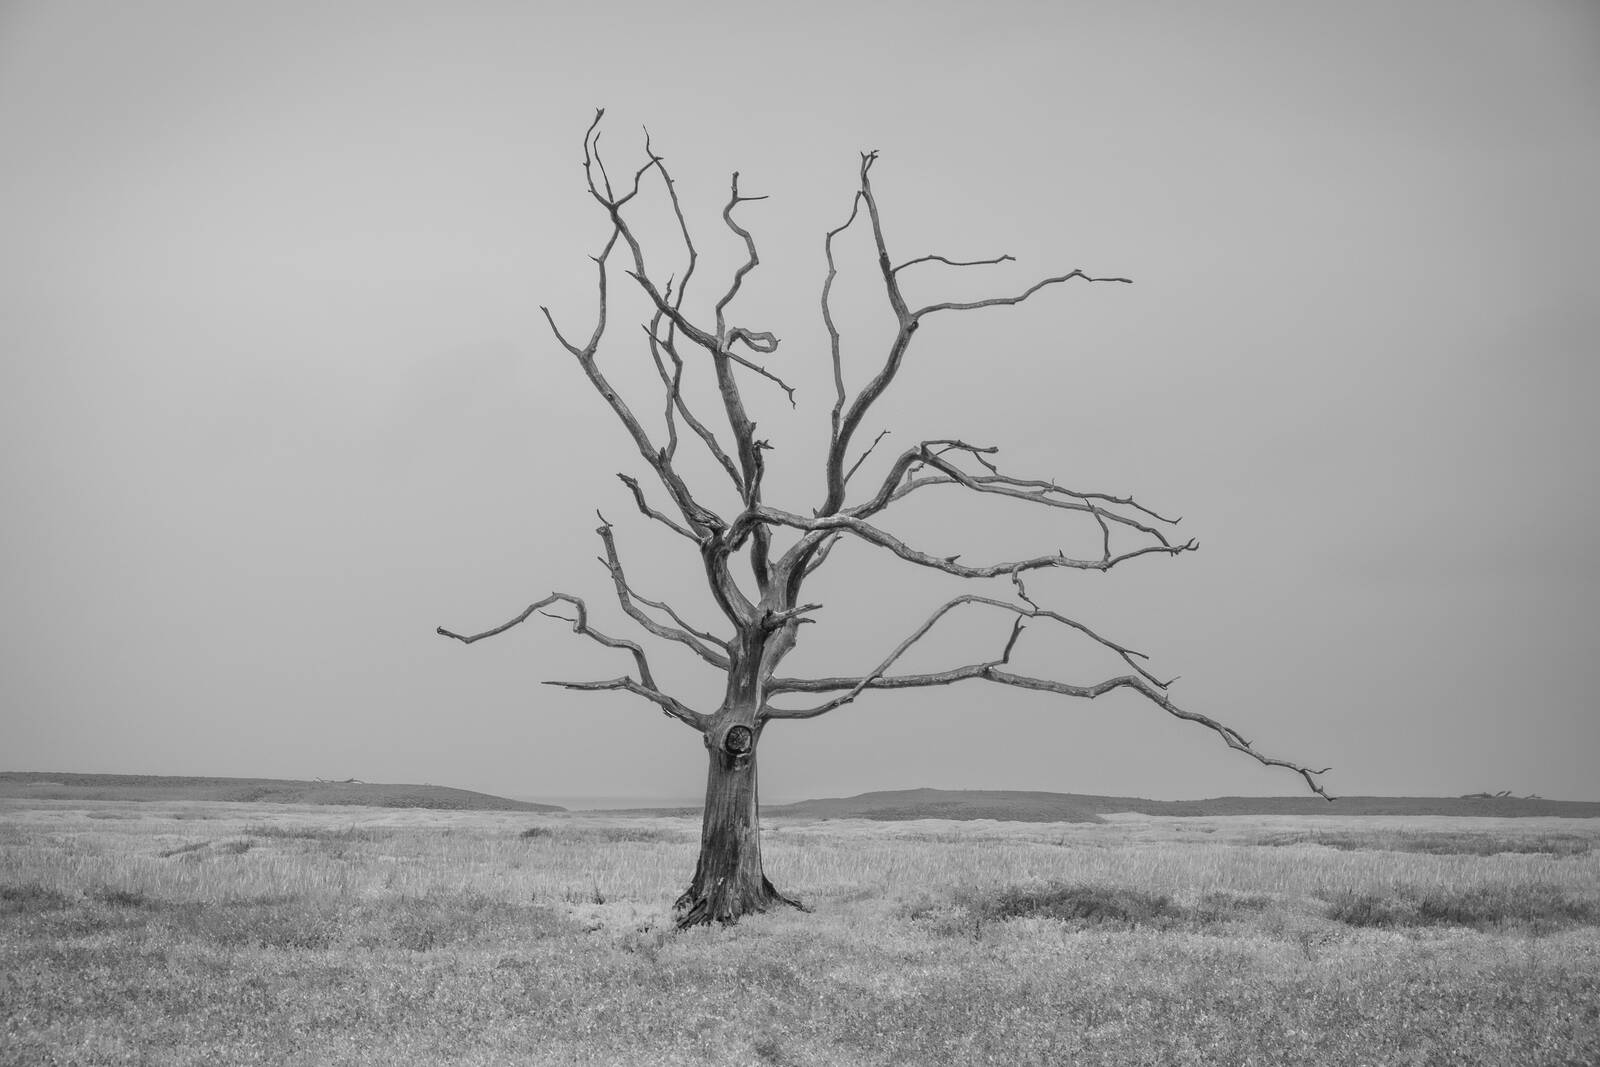 Image of Dead Trees in the Porlock Marshes by Andreas Marjoram